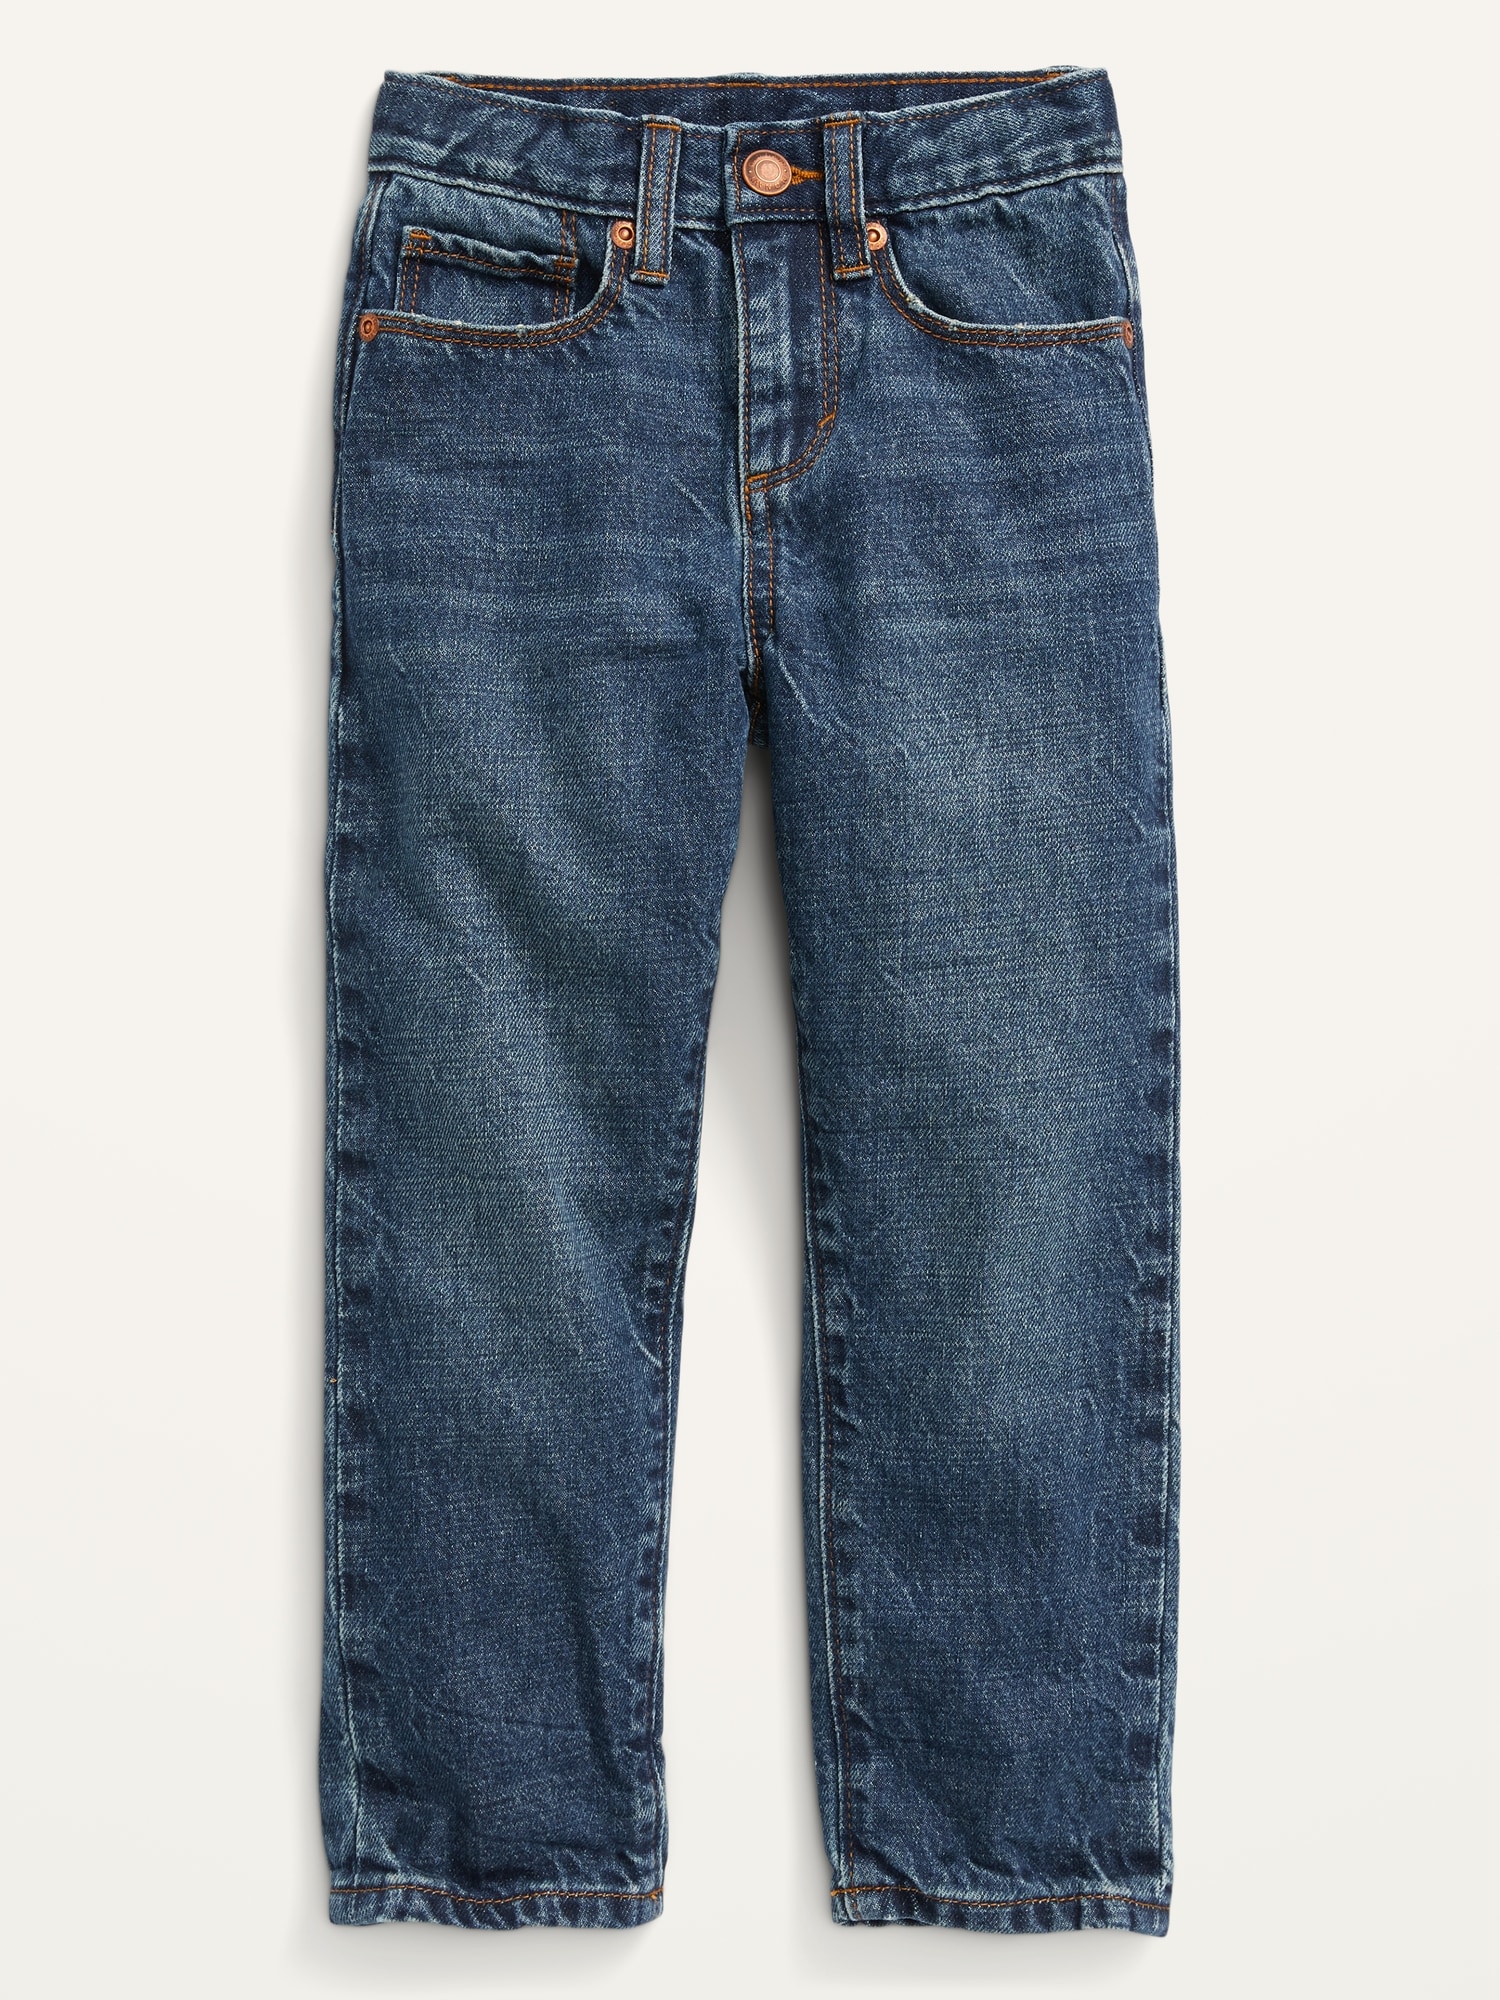 Unisex Loose Non-Stretch Dark-Wash Jeans for Toddler | Old Navy